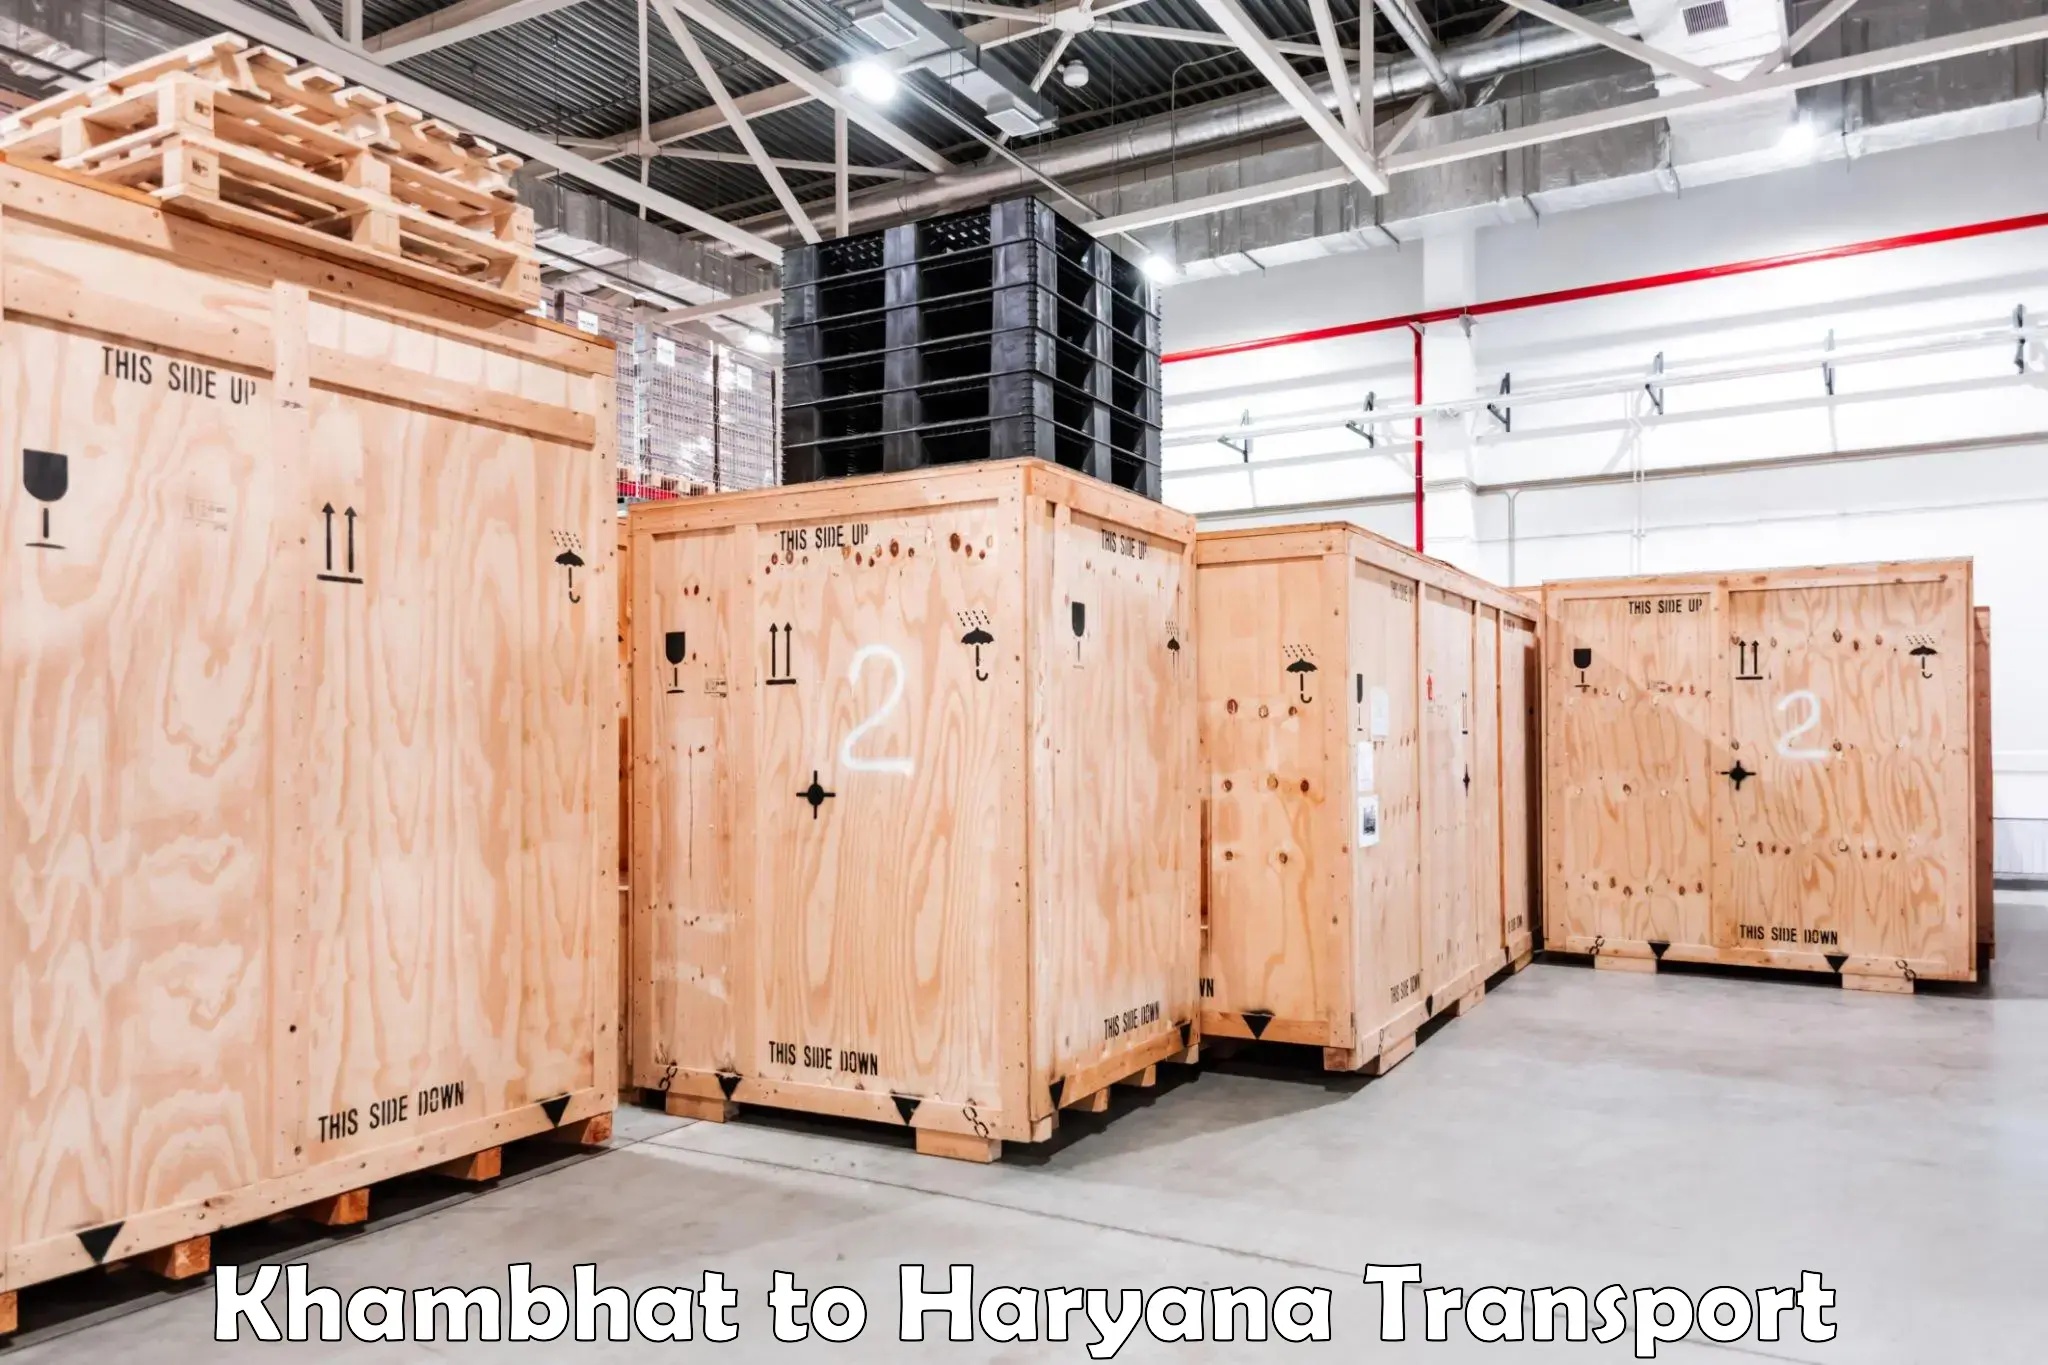 Air freight transport services Khambhat to NCR Haryana